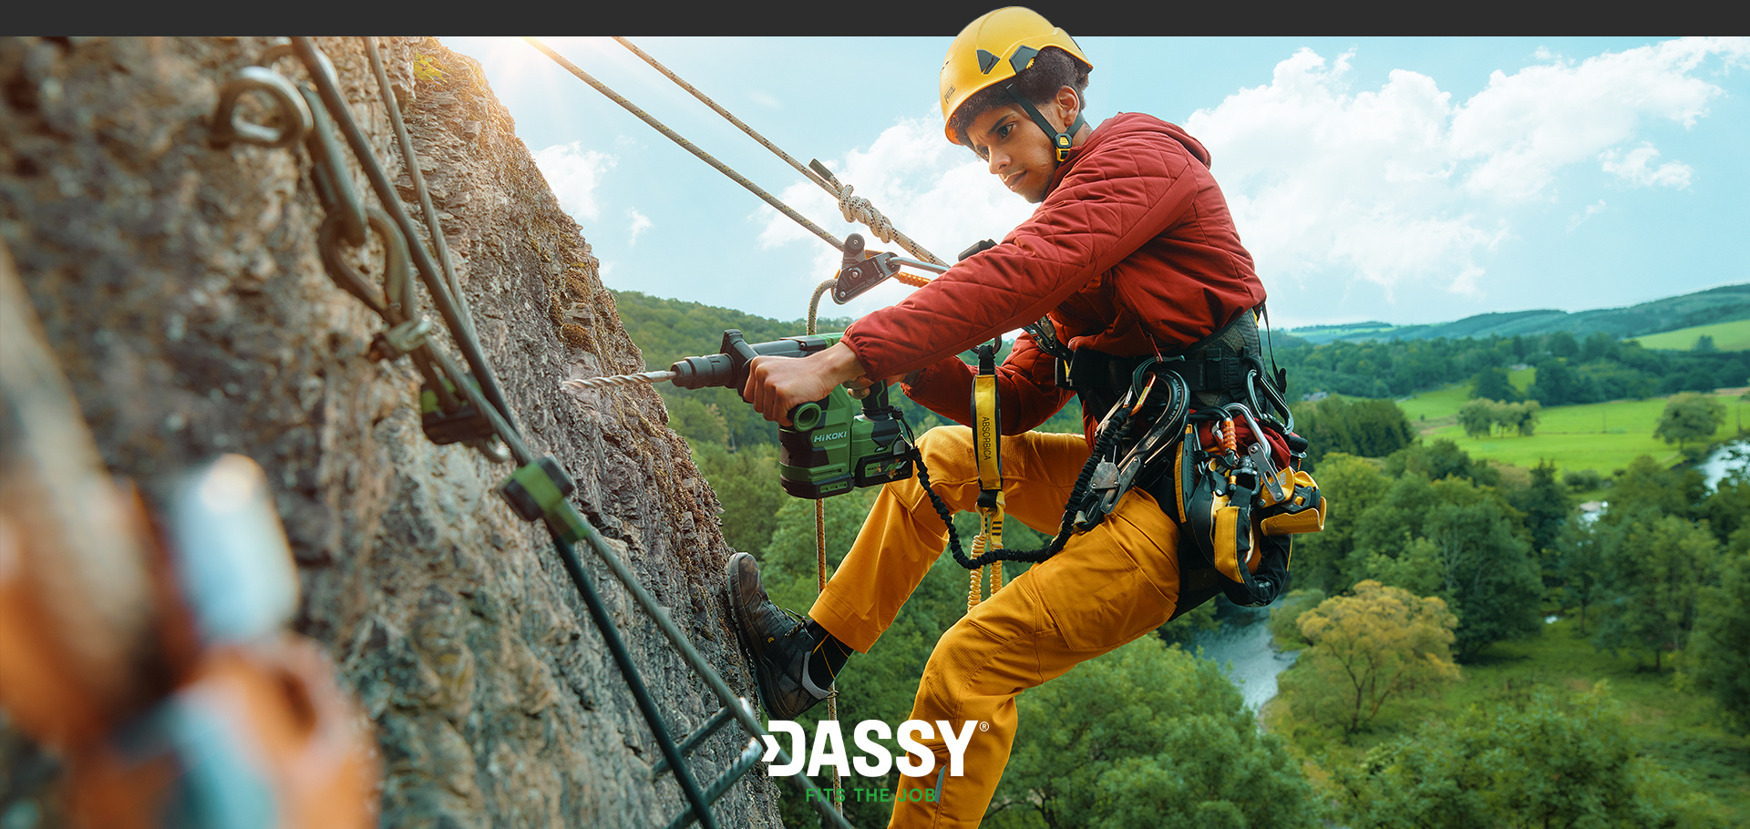 Shop DASSY ViVid ®  - Stand out.#Discover here